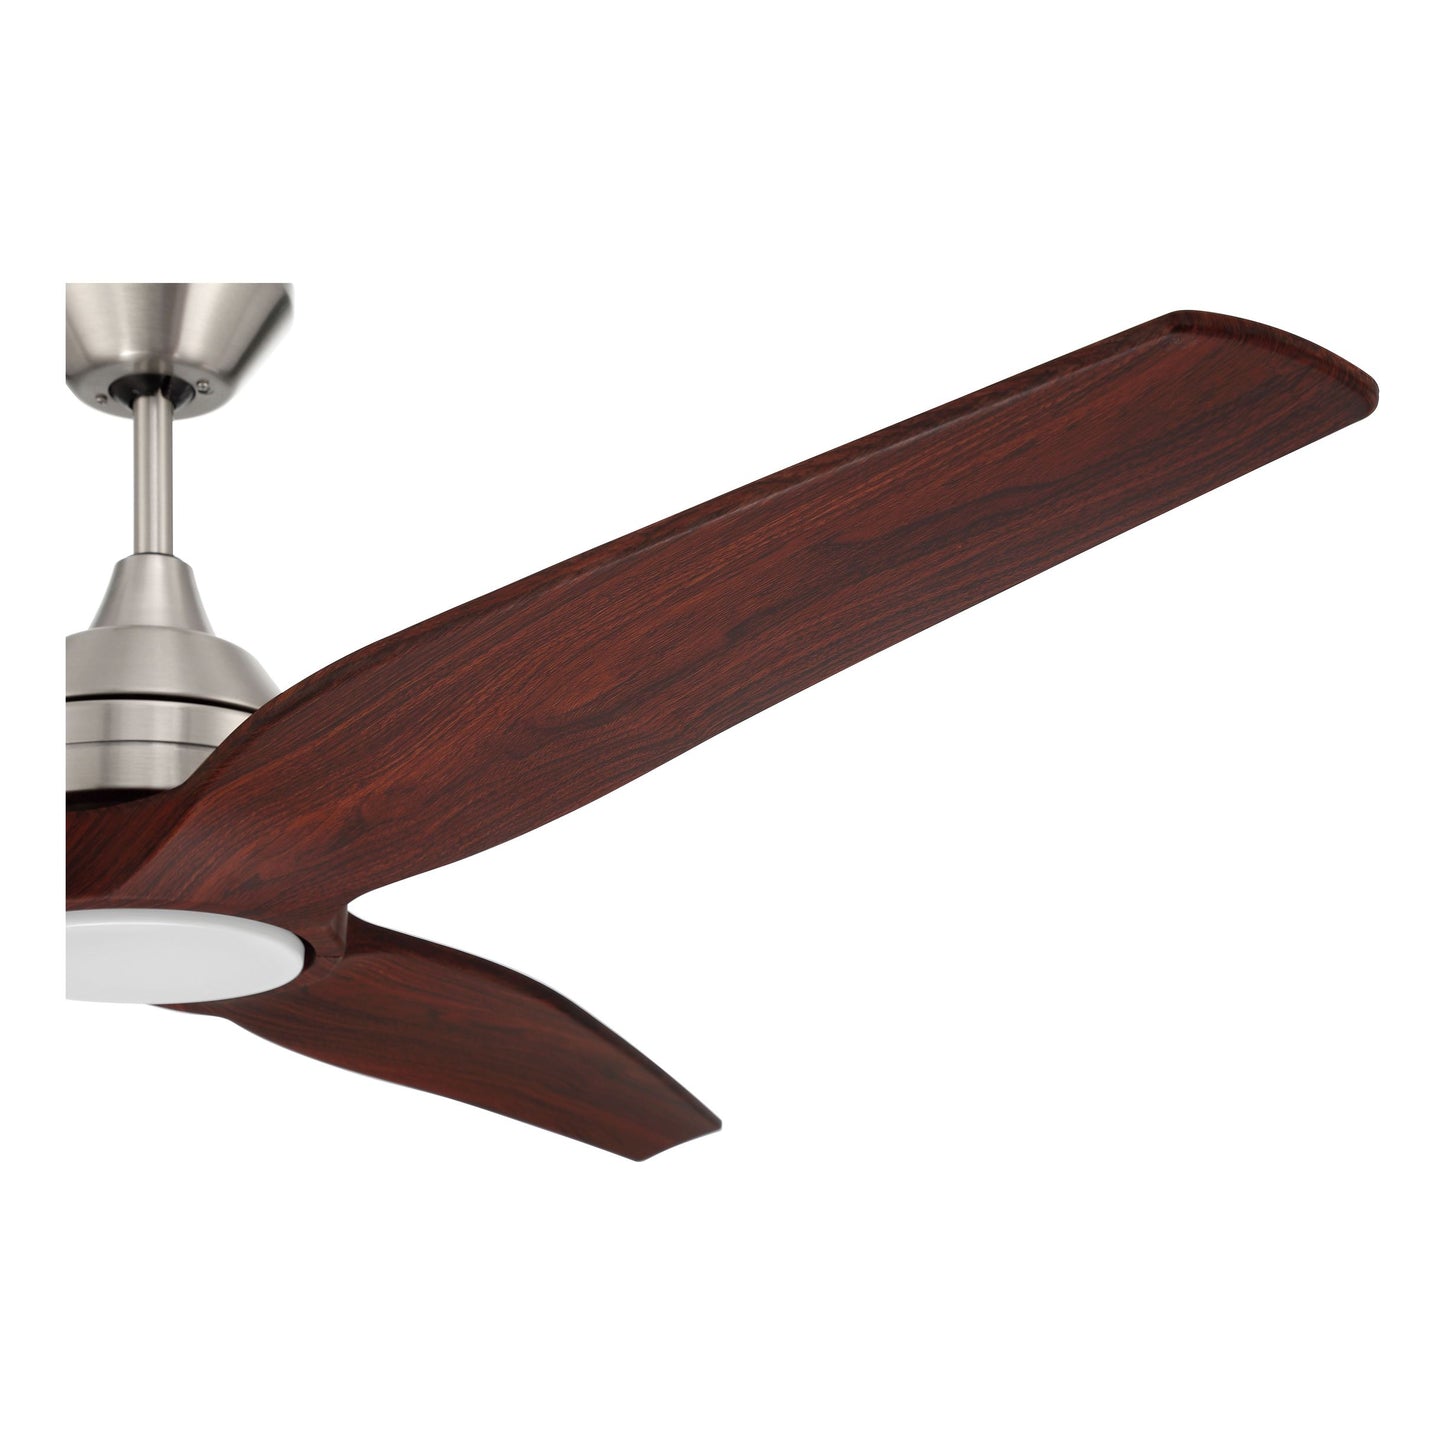 LIM60BNK3 - Limerick 60" 3 Blade Ceiling Fan with Light Kit - Remote & Wall Control - Brushed Polish